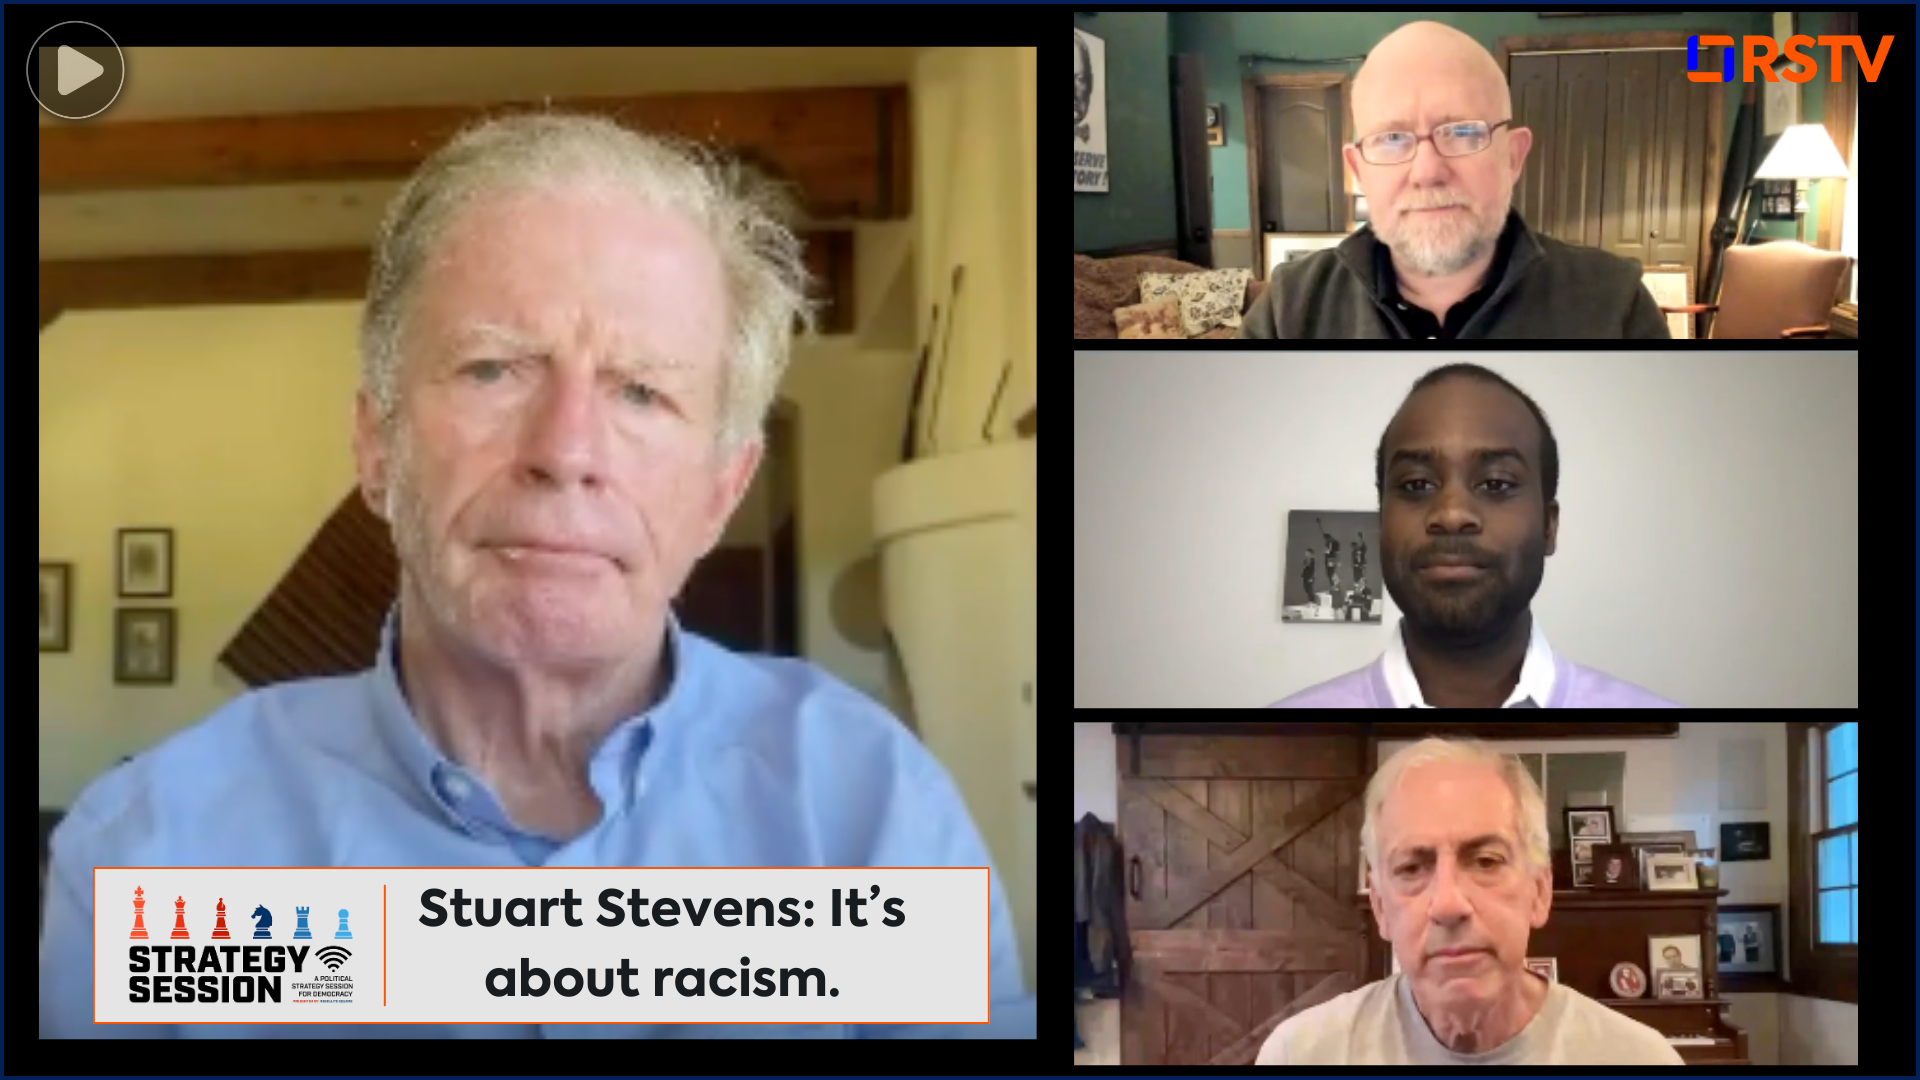 Stuart Stevens: "Trumpism is more about race than any issue. I don't understand why the press doesn't call this out."